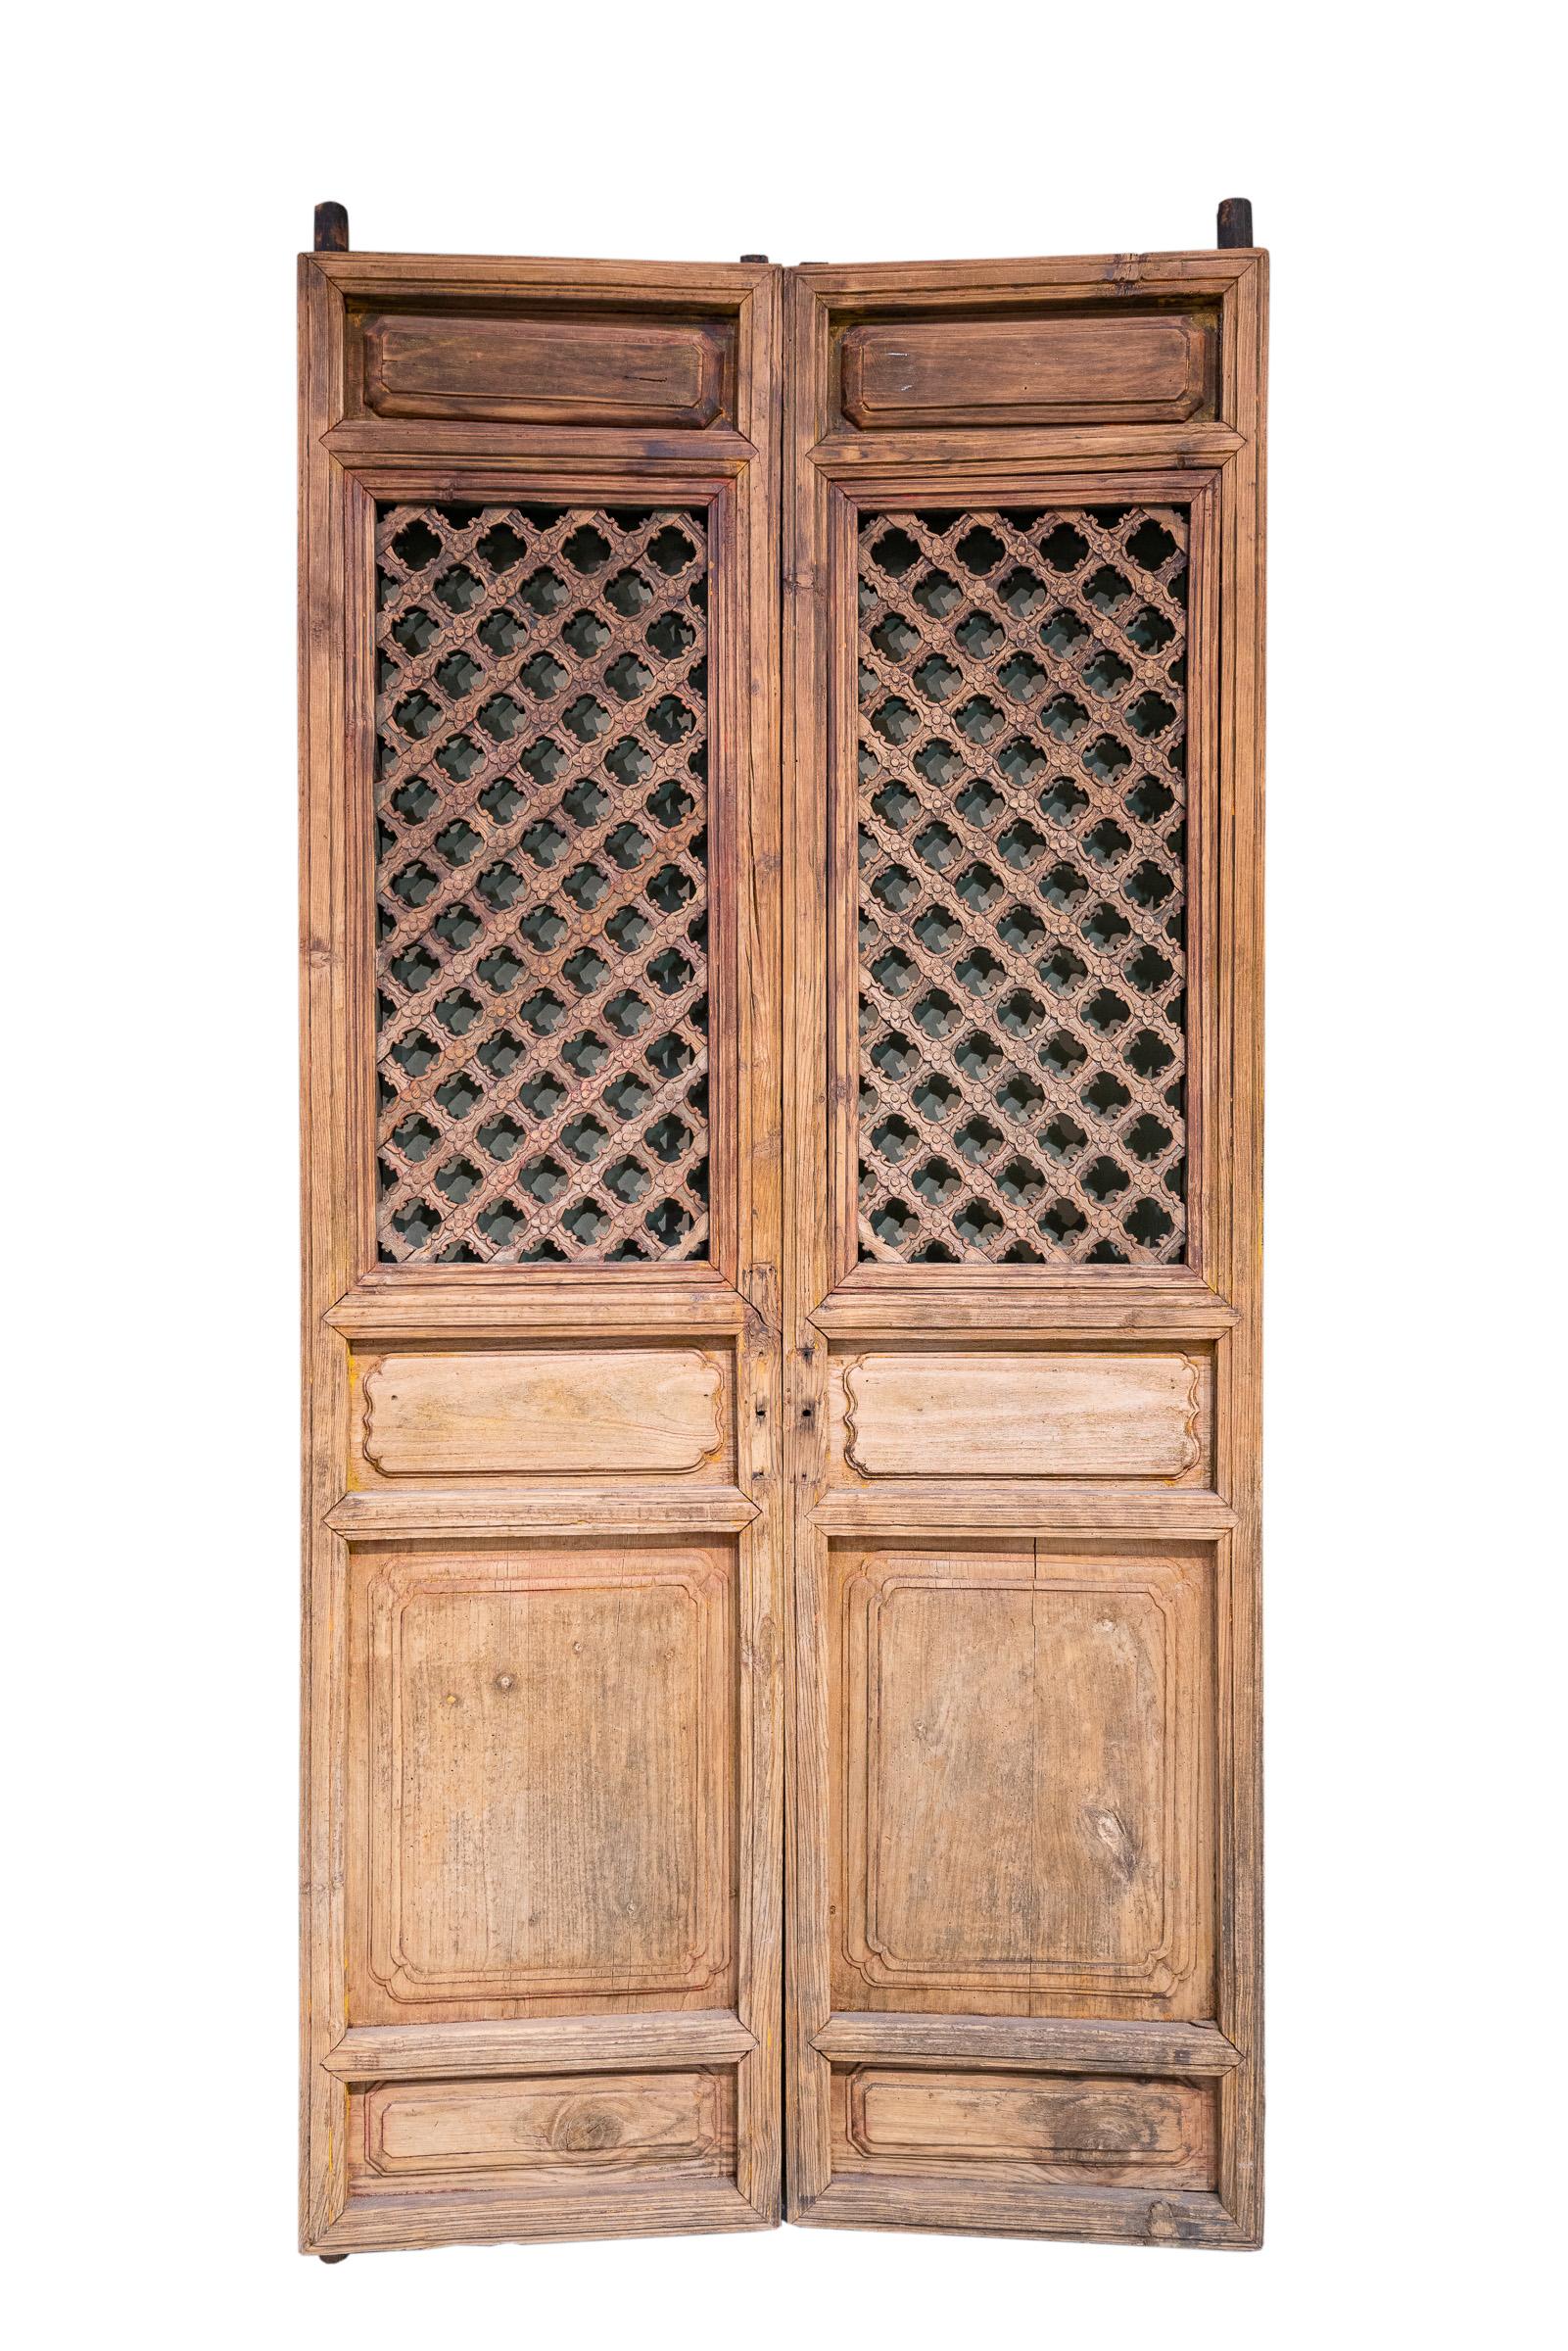 Late 19th century door panels from Shanxi province, China. These doors are simple in appearance but have many nice details; like the many layers of edging around the main lattice, and there are nice beadings around the plain raised panels in the top